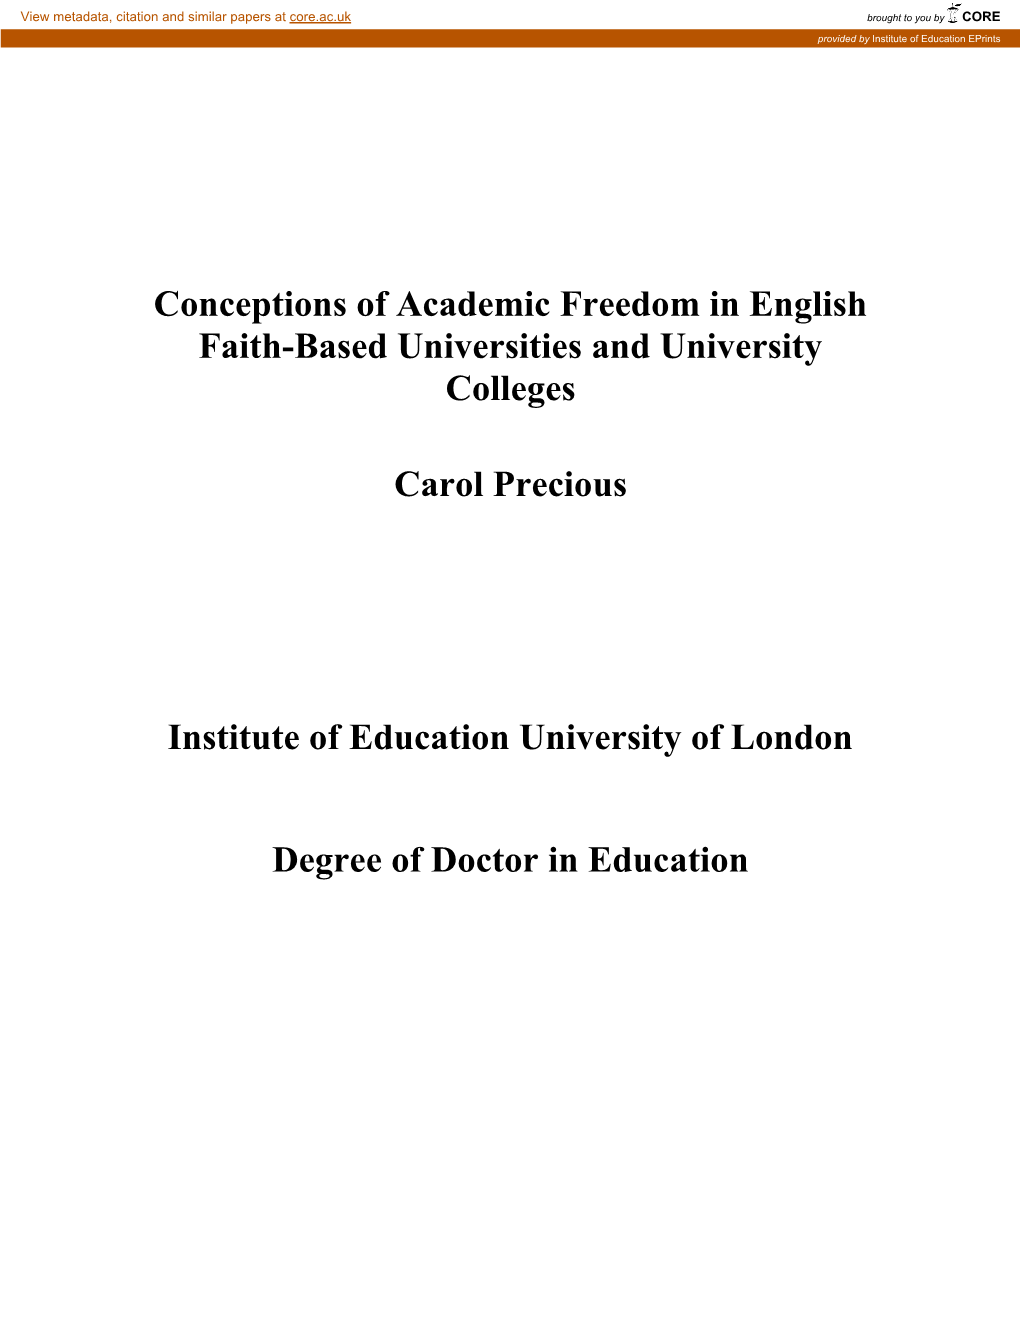 Conceptions of Academic Freedom in English Faith-Based Universities and University Colleges